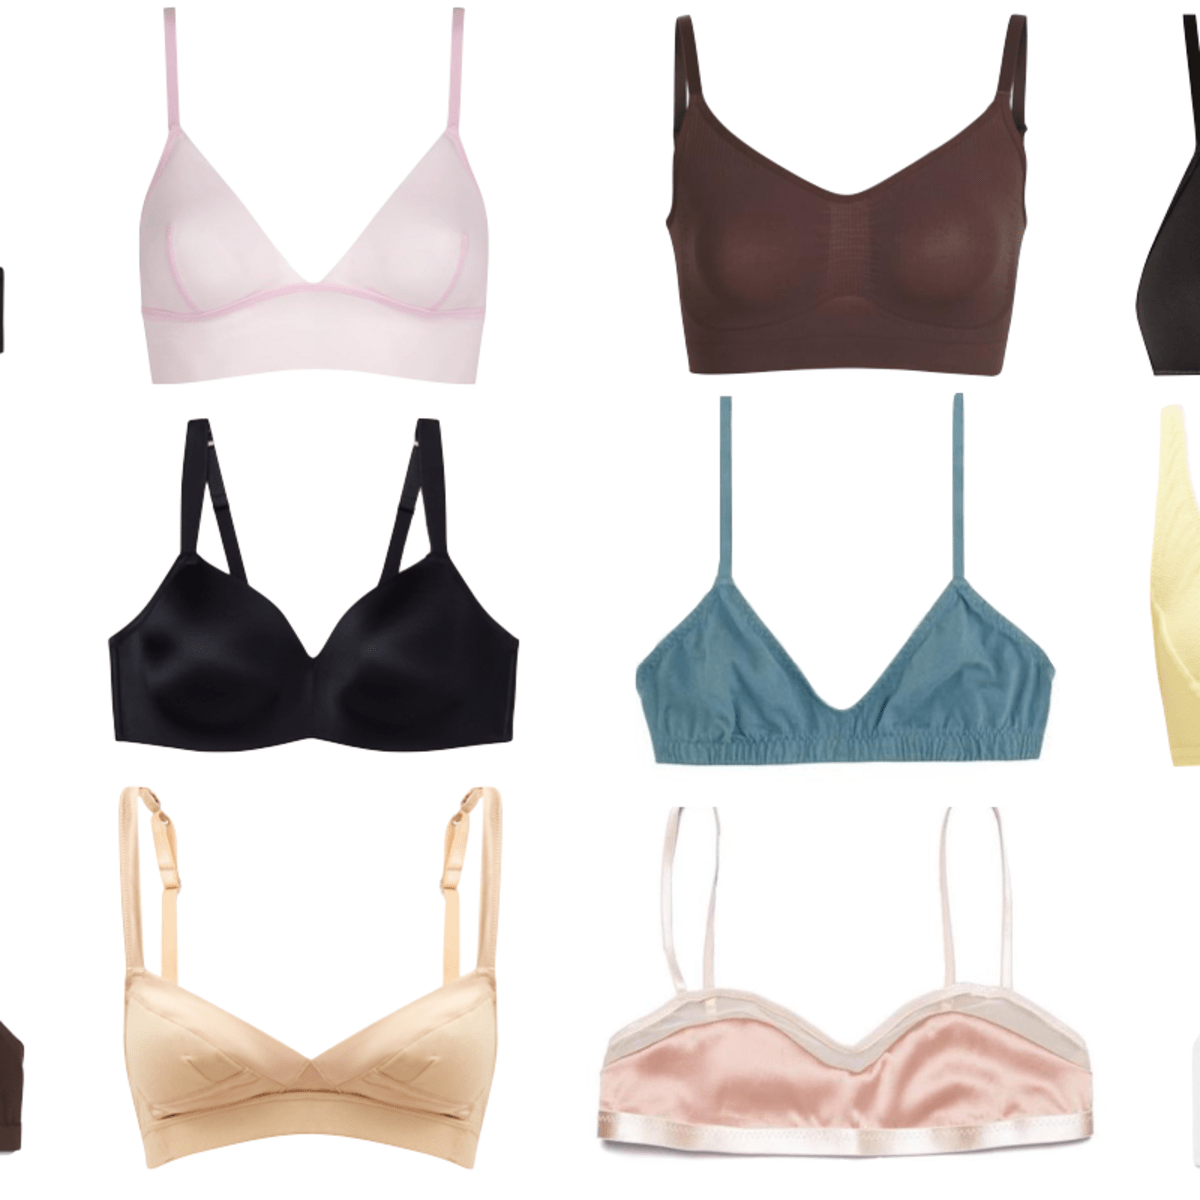 26 Delightful Bralettes to Wear at Home, With or Without a Top